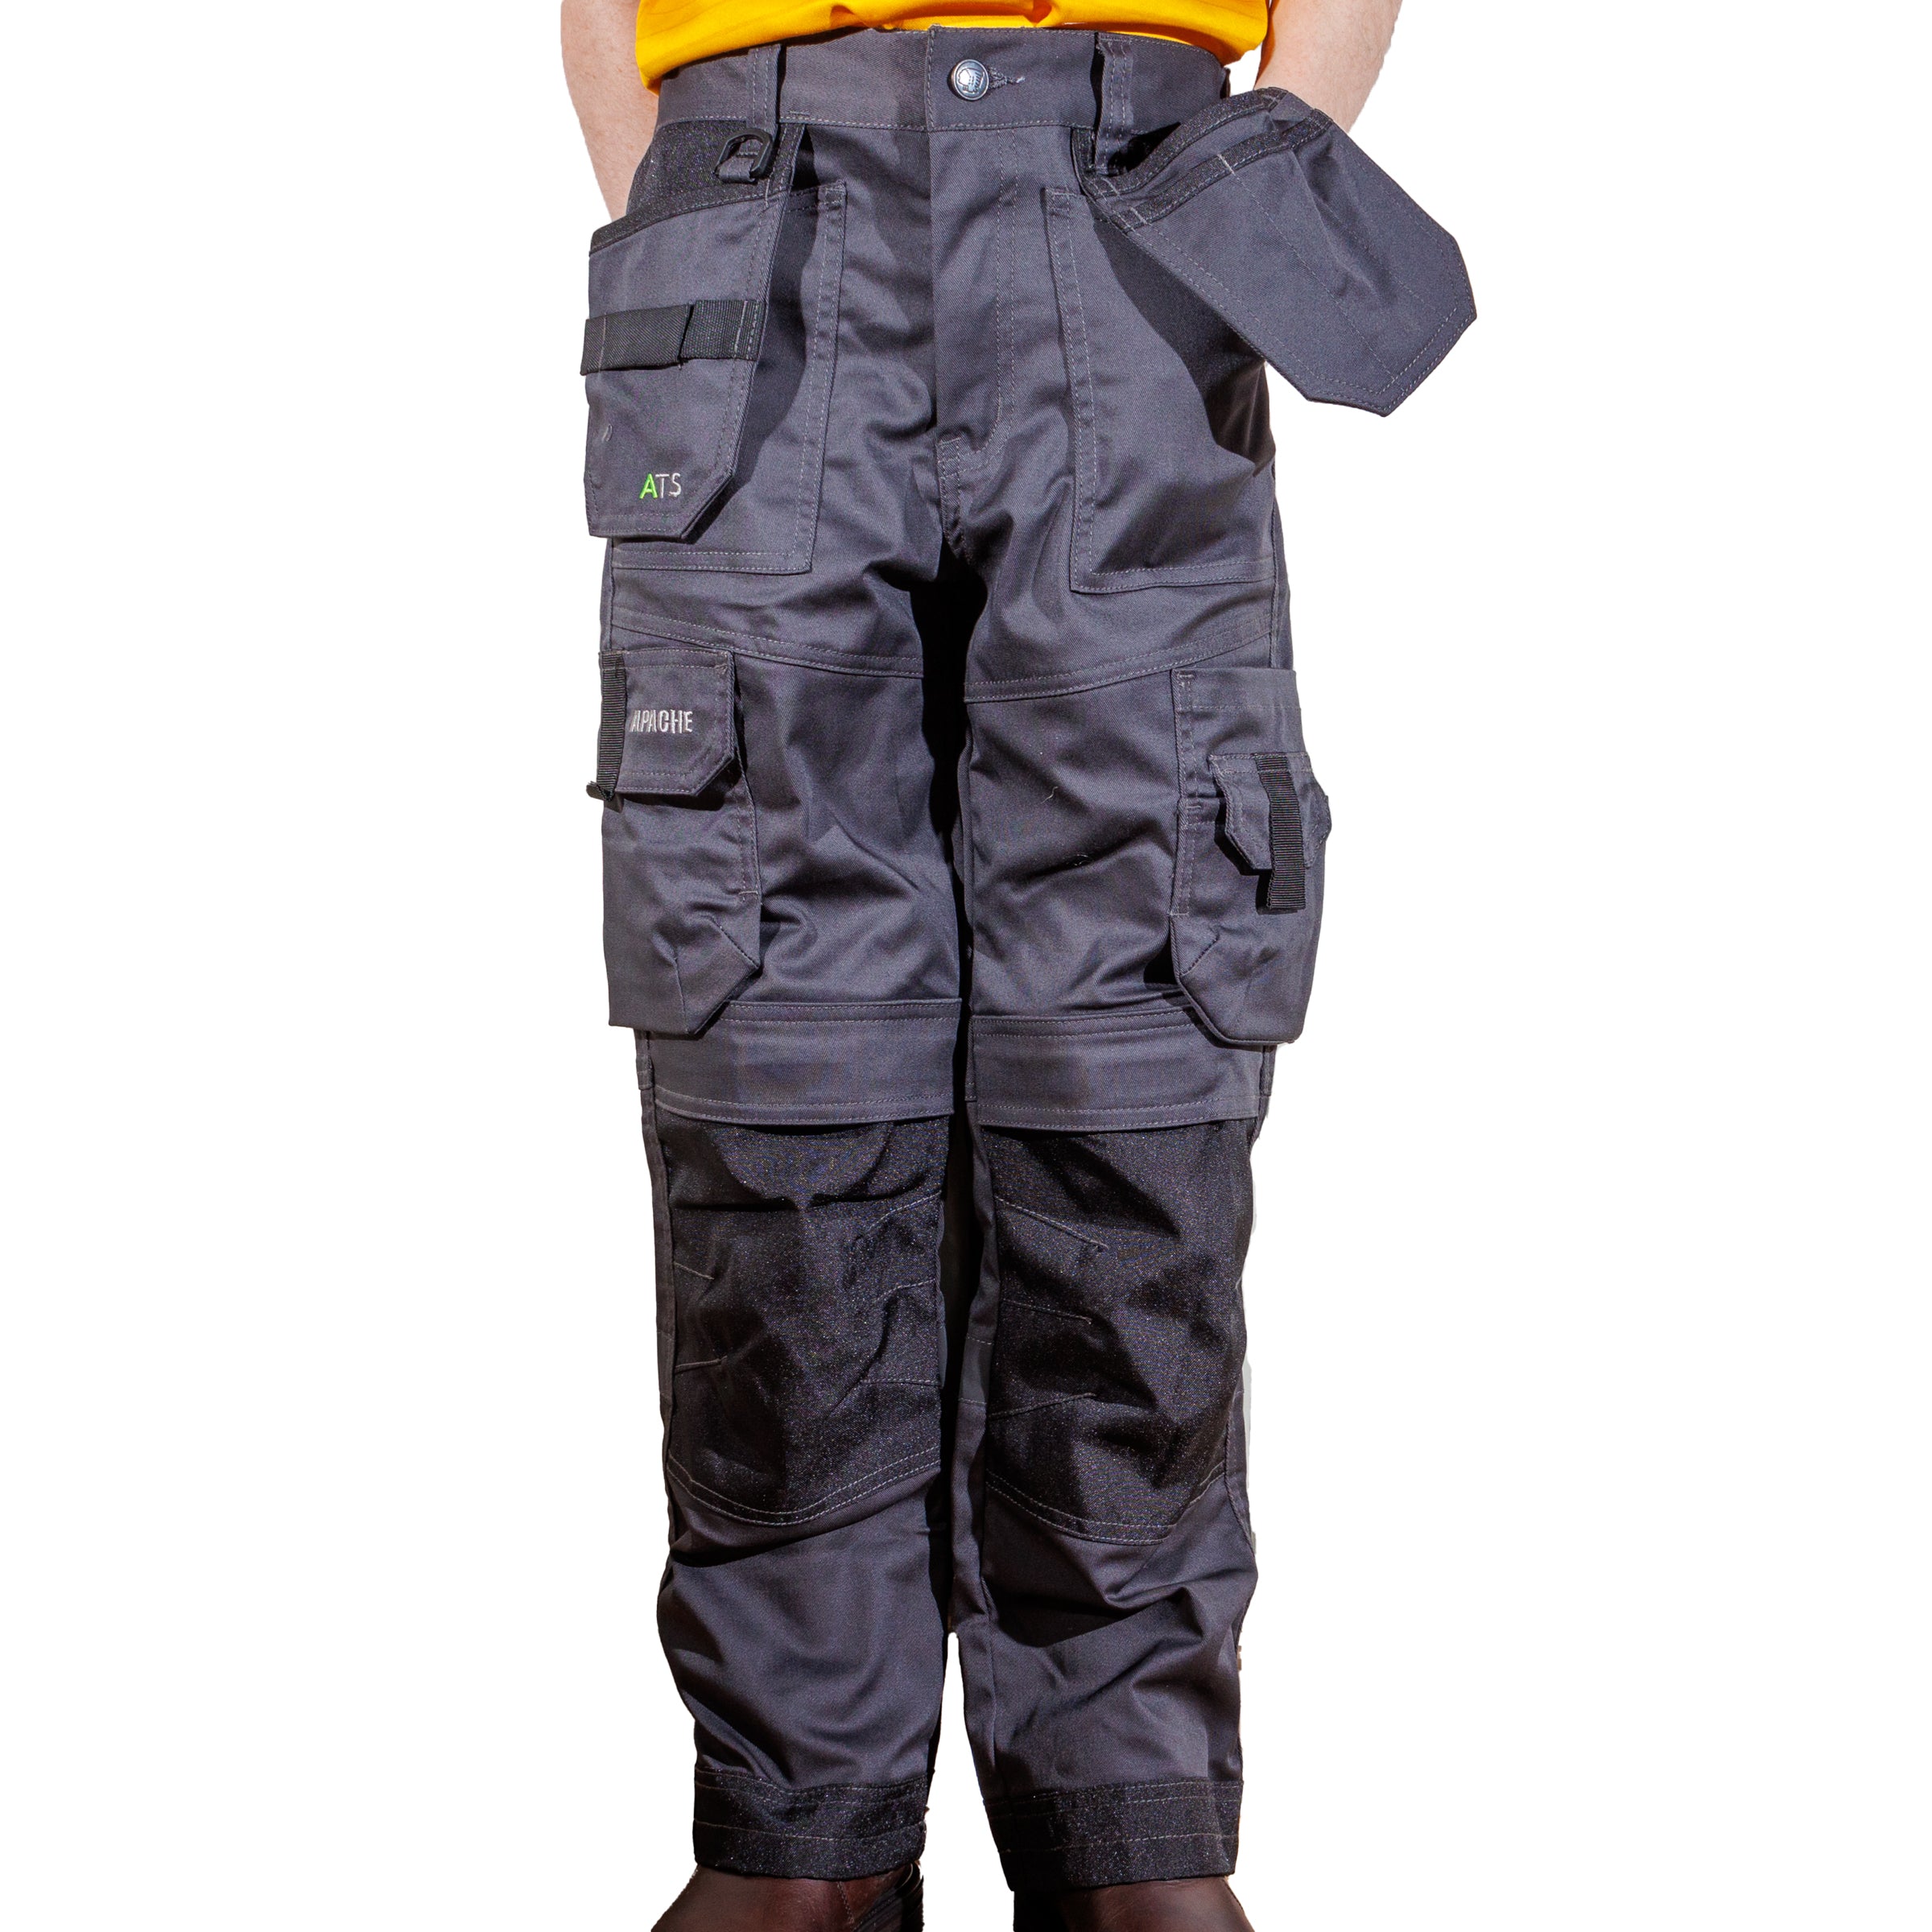 Buy Mascot Accelerate Safe work trousers for kids at Cheap-workwear.com